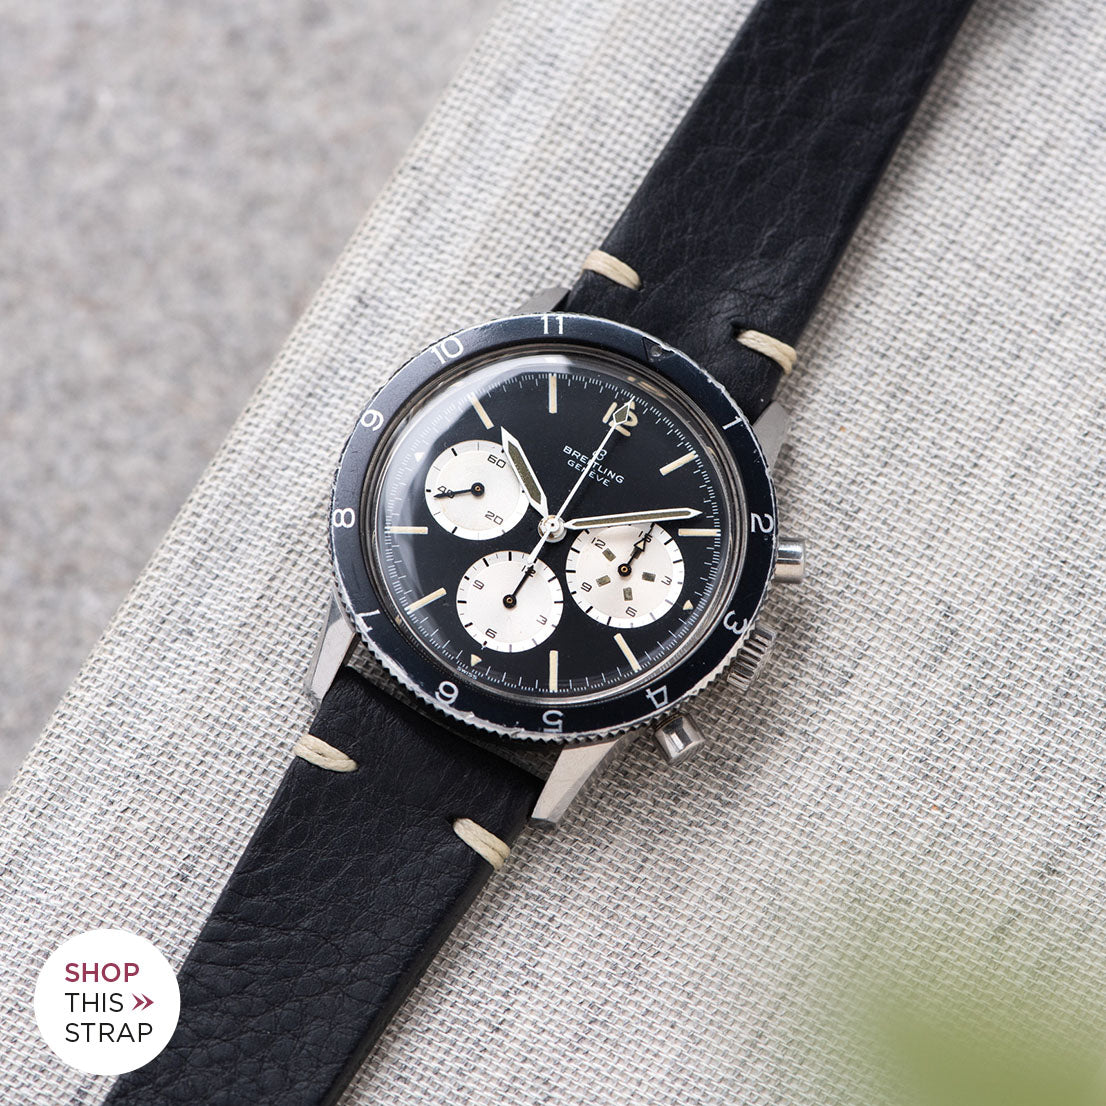 Bulang and Sons_Strap Guide_The Breitling Co-Pilot 7650 Chronograph_ Black Leather Watch Strap